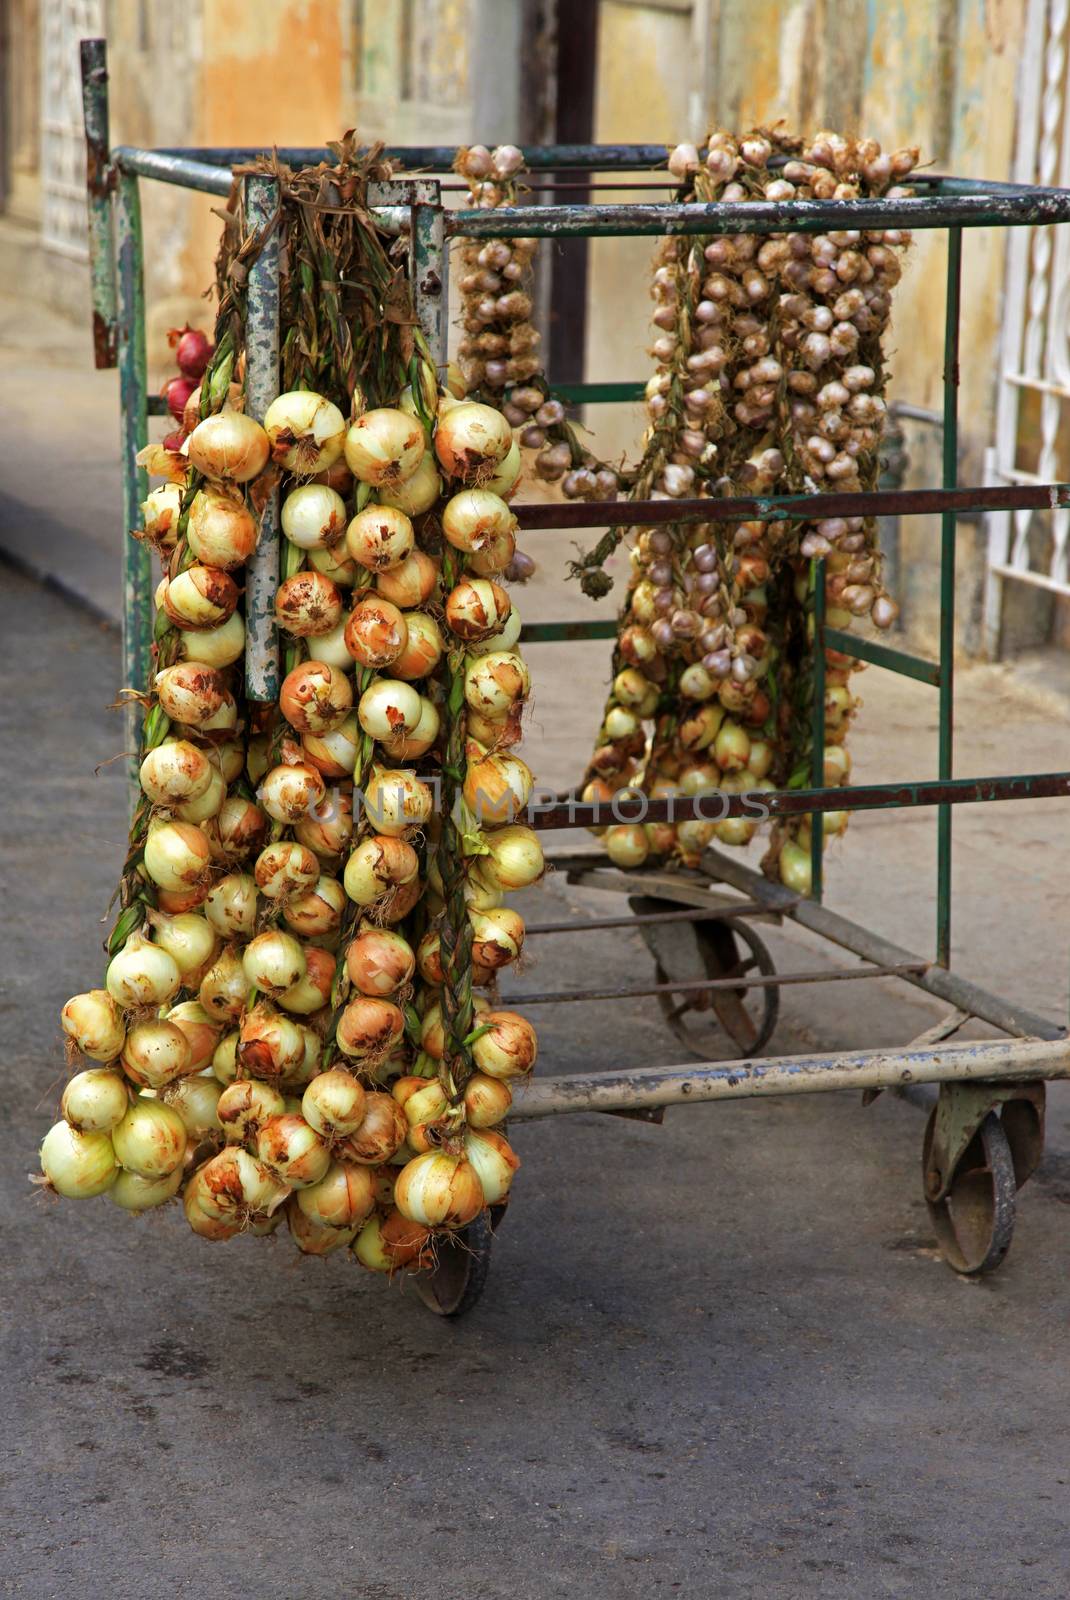 Selling onions on the street in Old Havana by friday